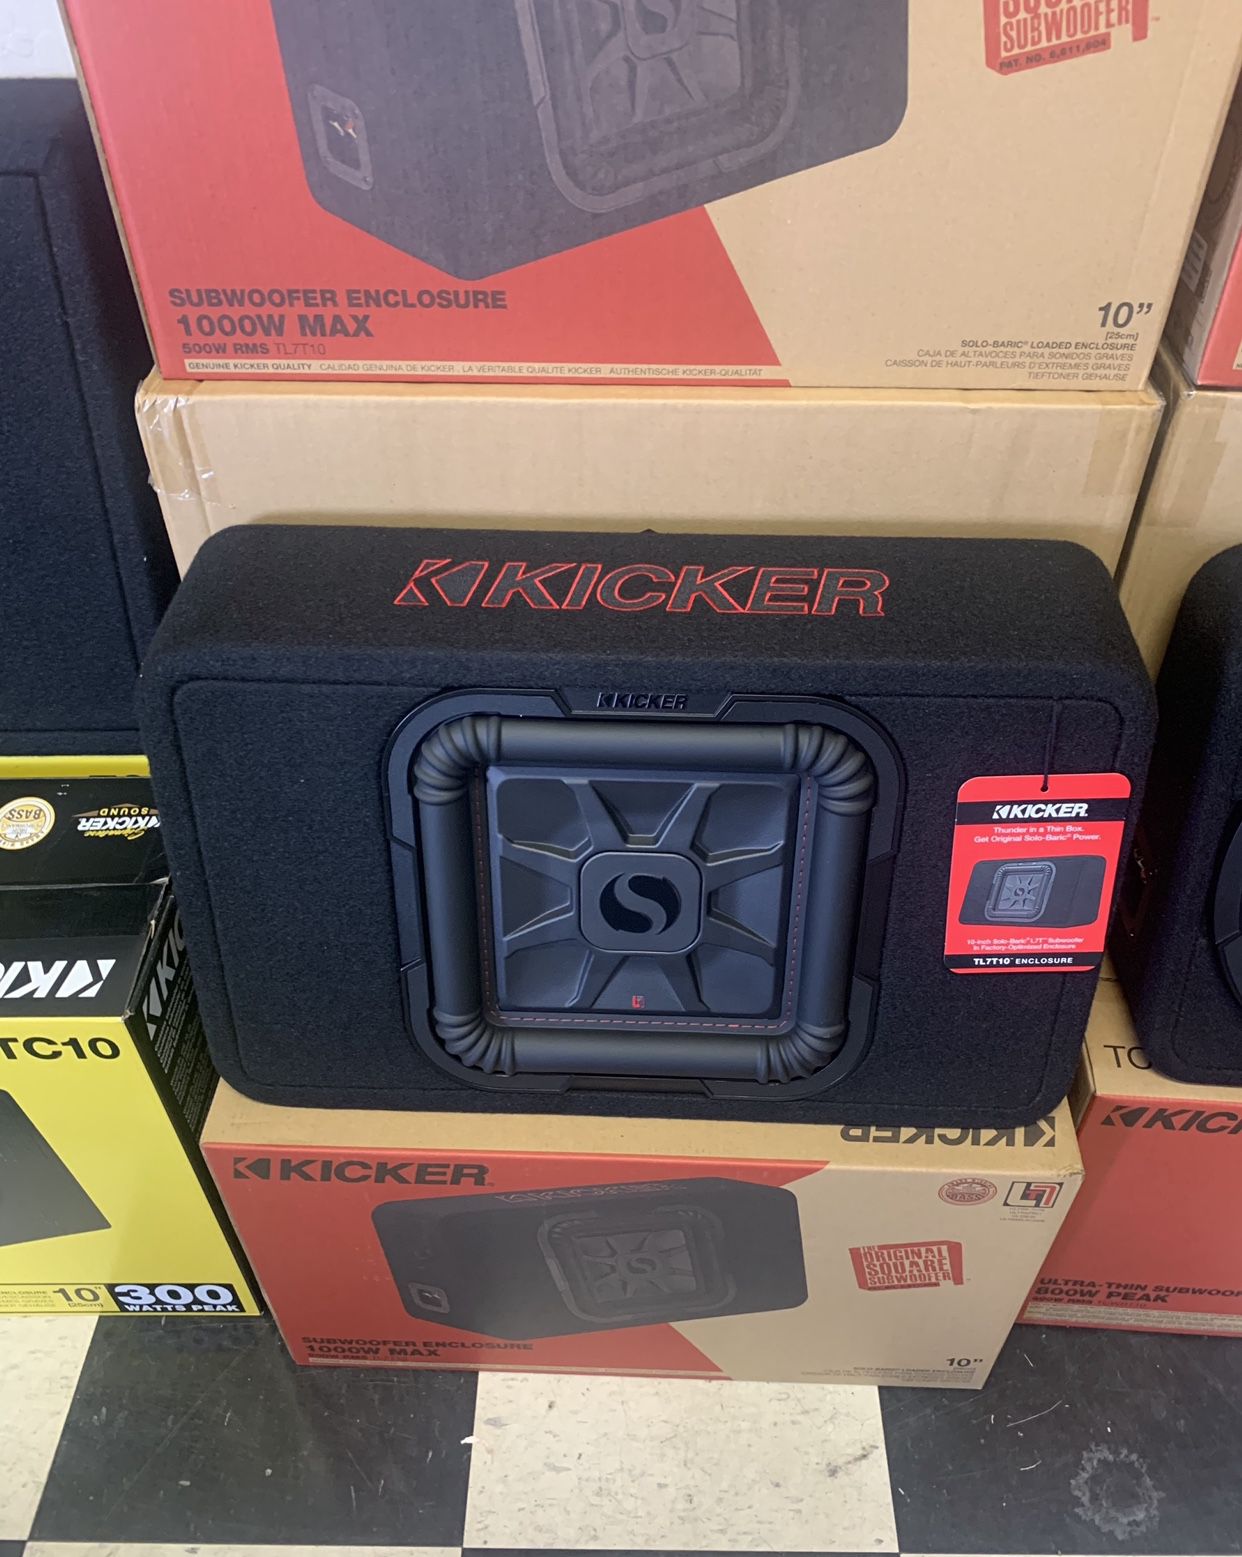 Kicker Car Audio . 10 Inch Car Stereo Subwoofer . L7 Series Ultra Thin Truck Box   Flash Sale $229 While They Last  New 